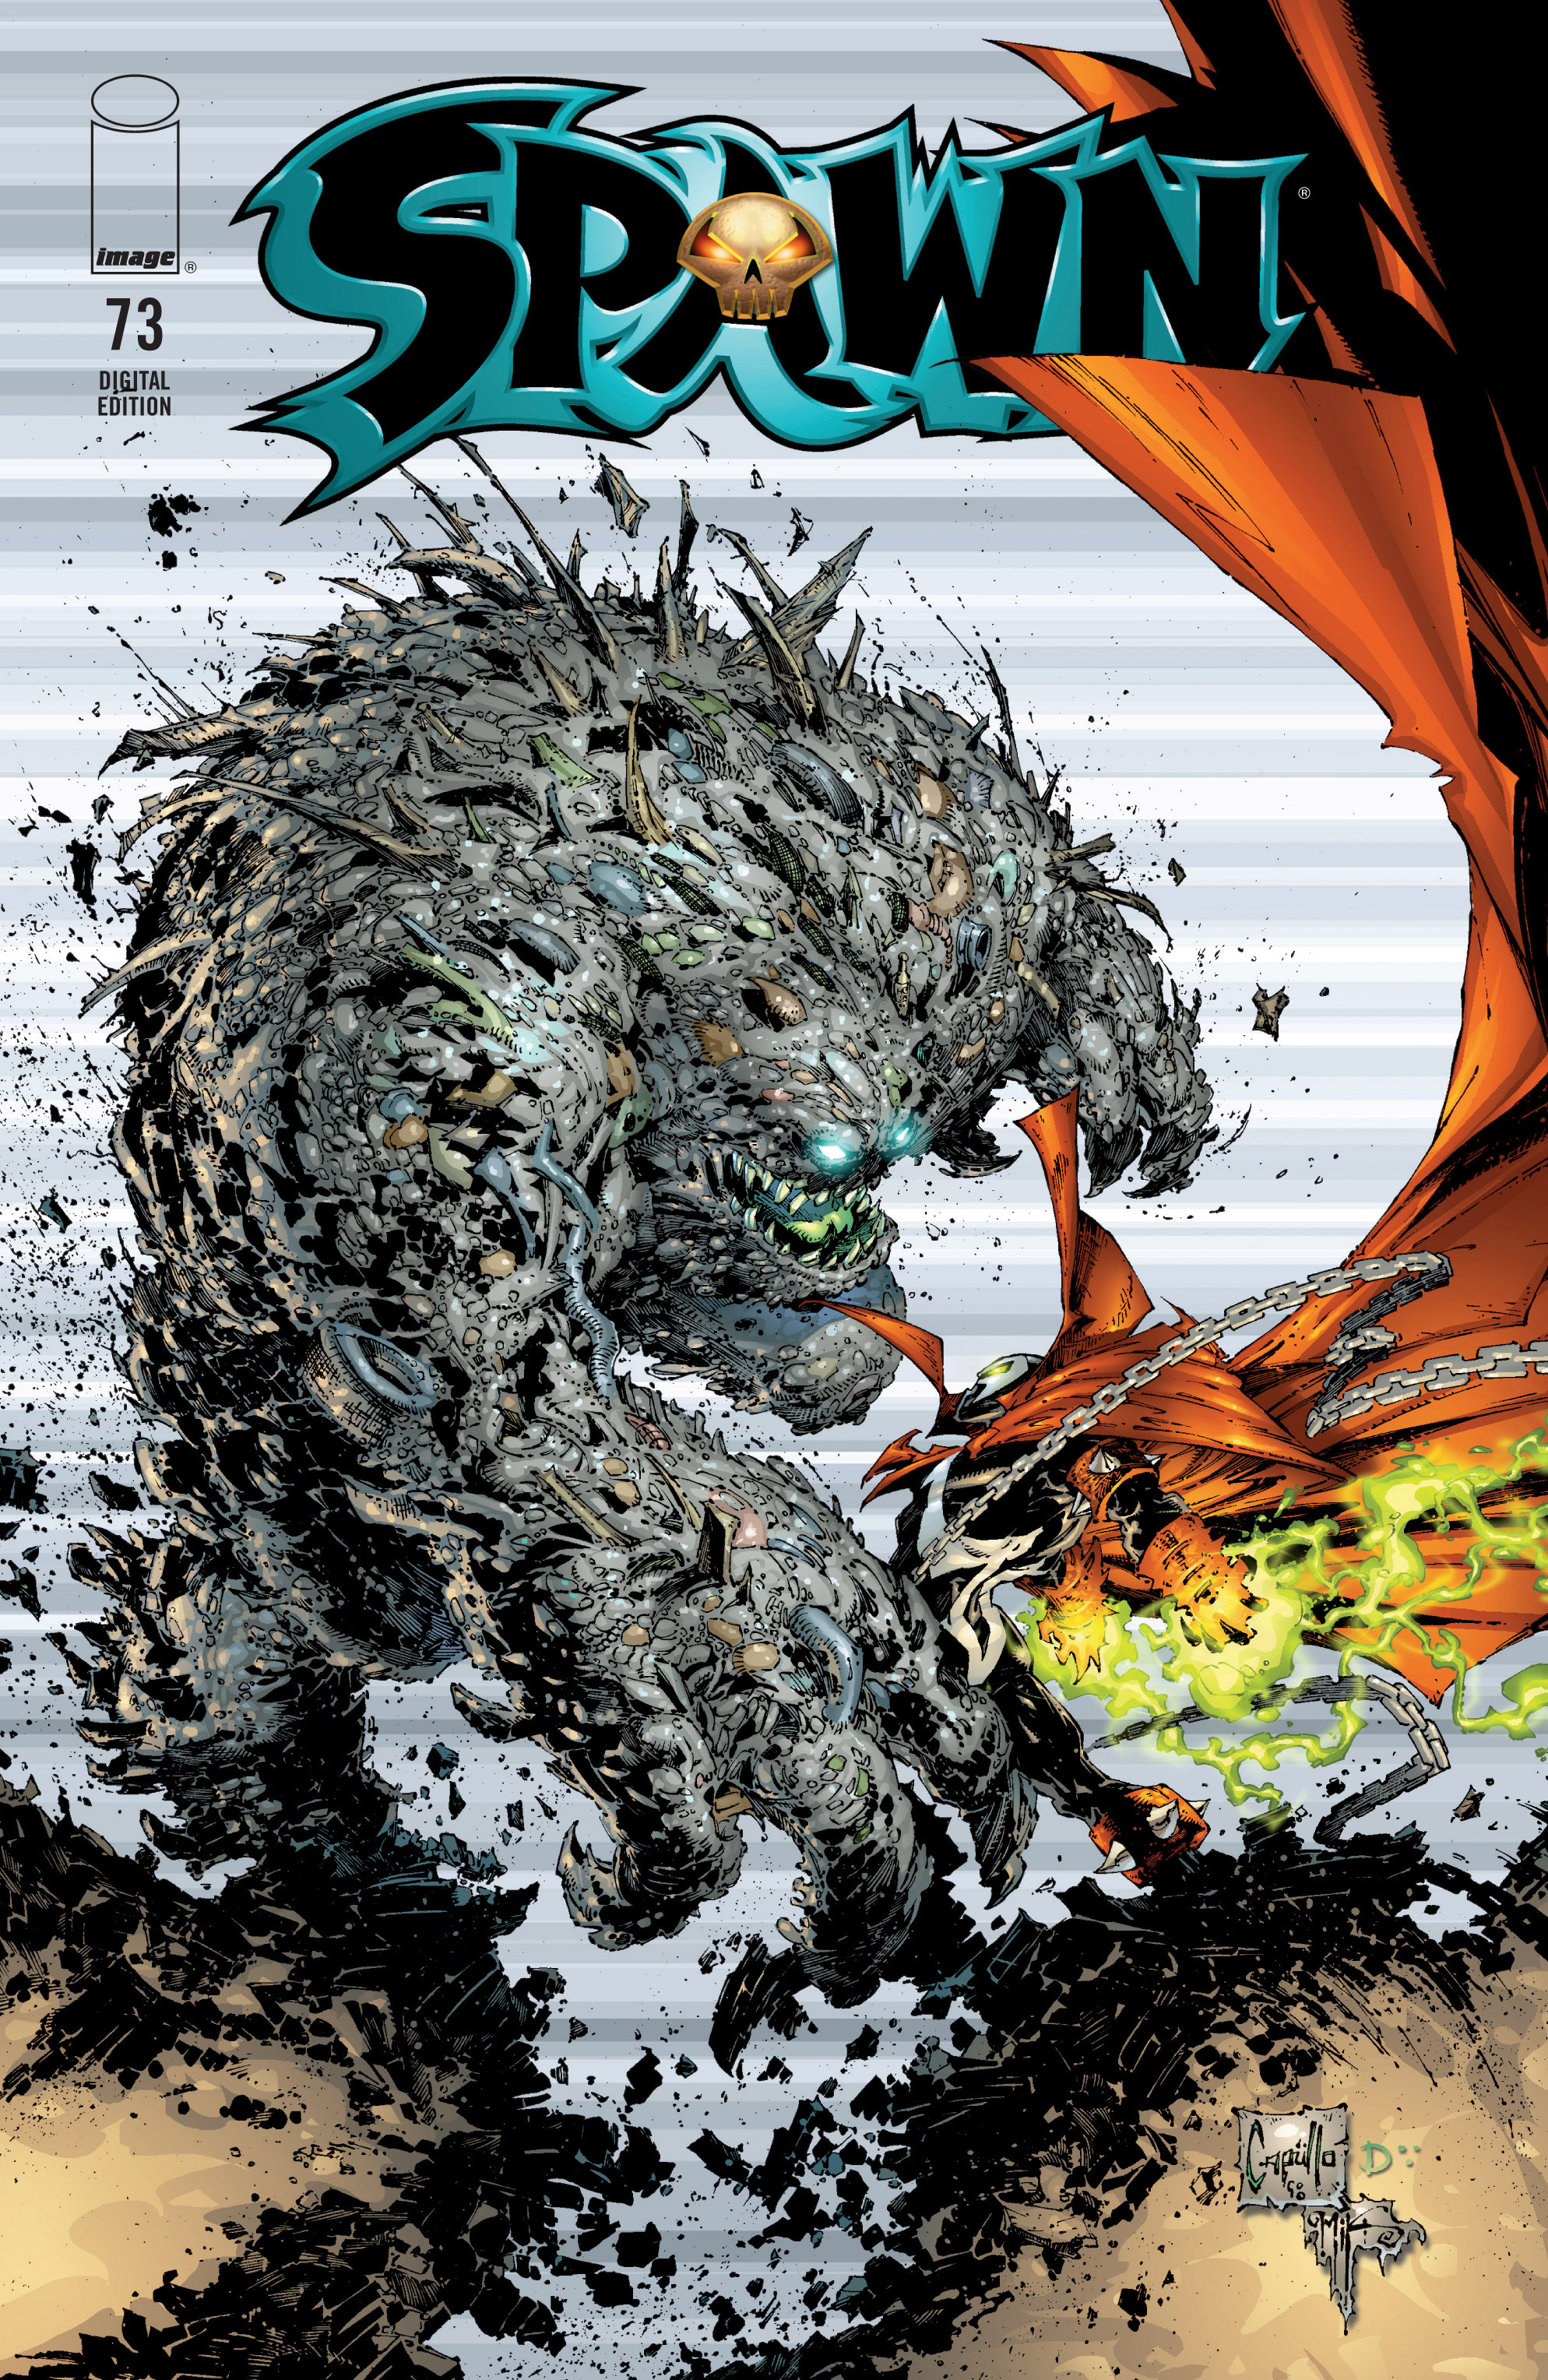 Read online Spawn comic -  Issue #73 - 1